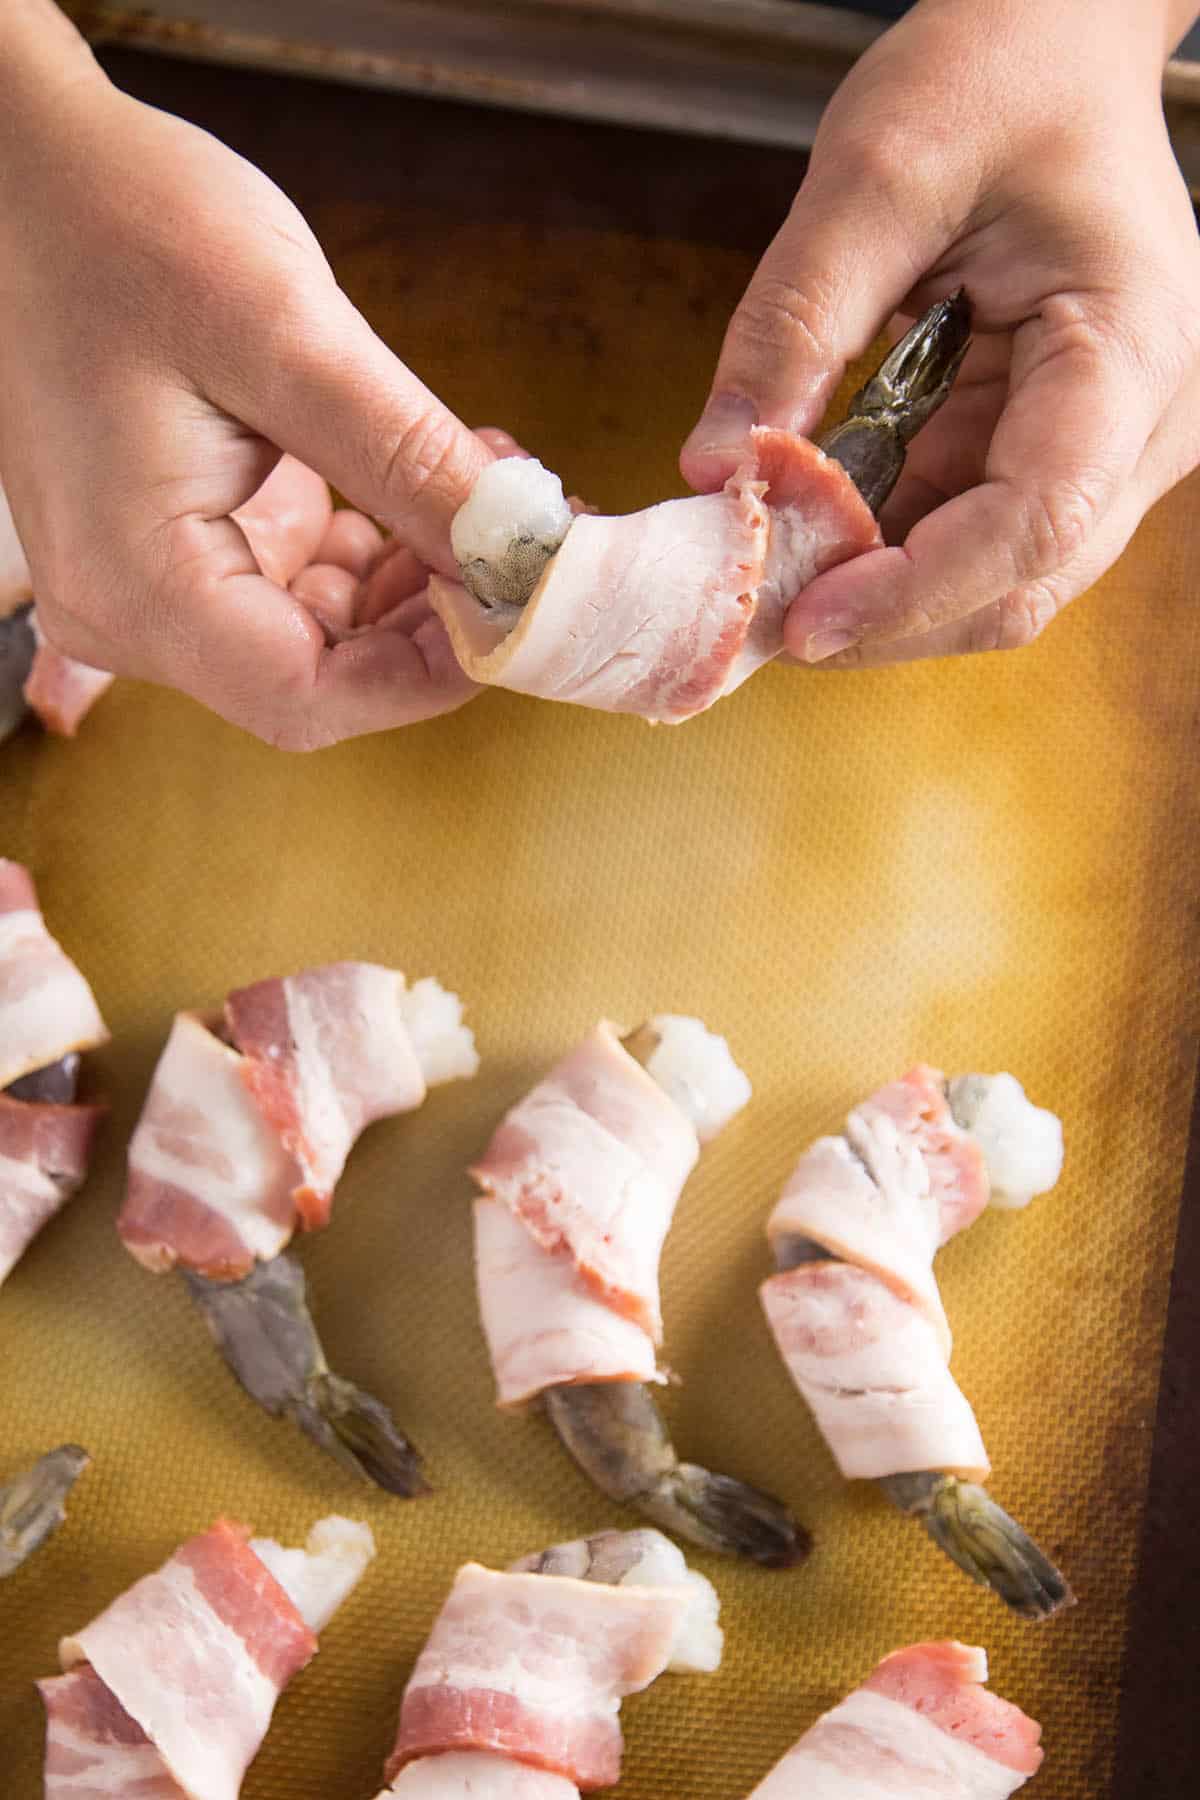 Wrapping the Shrimp in Bacon